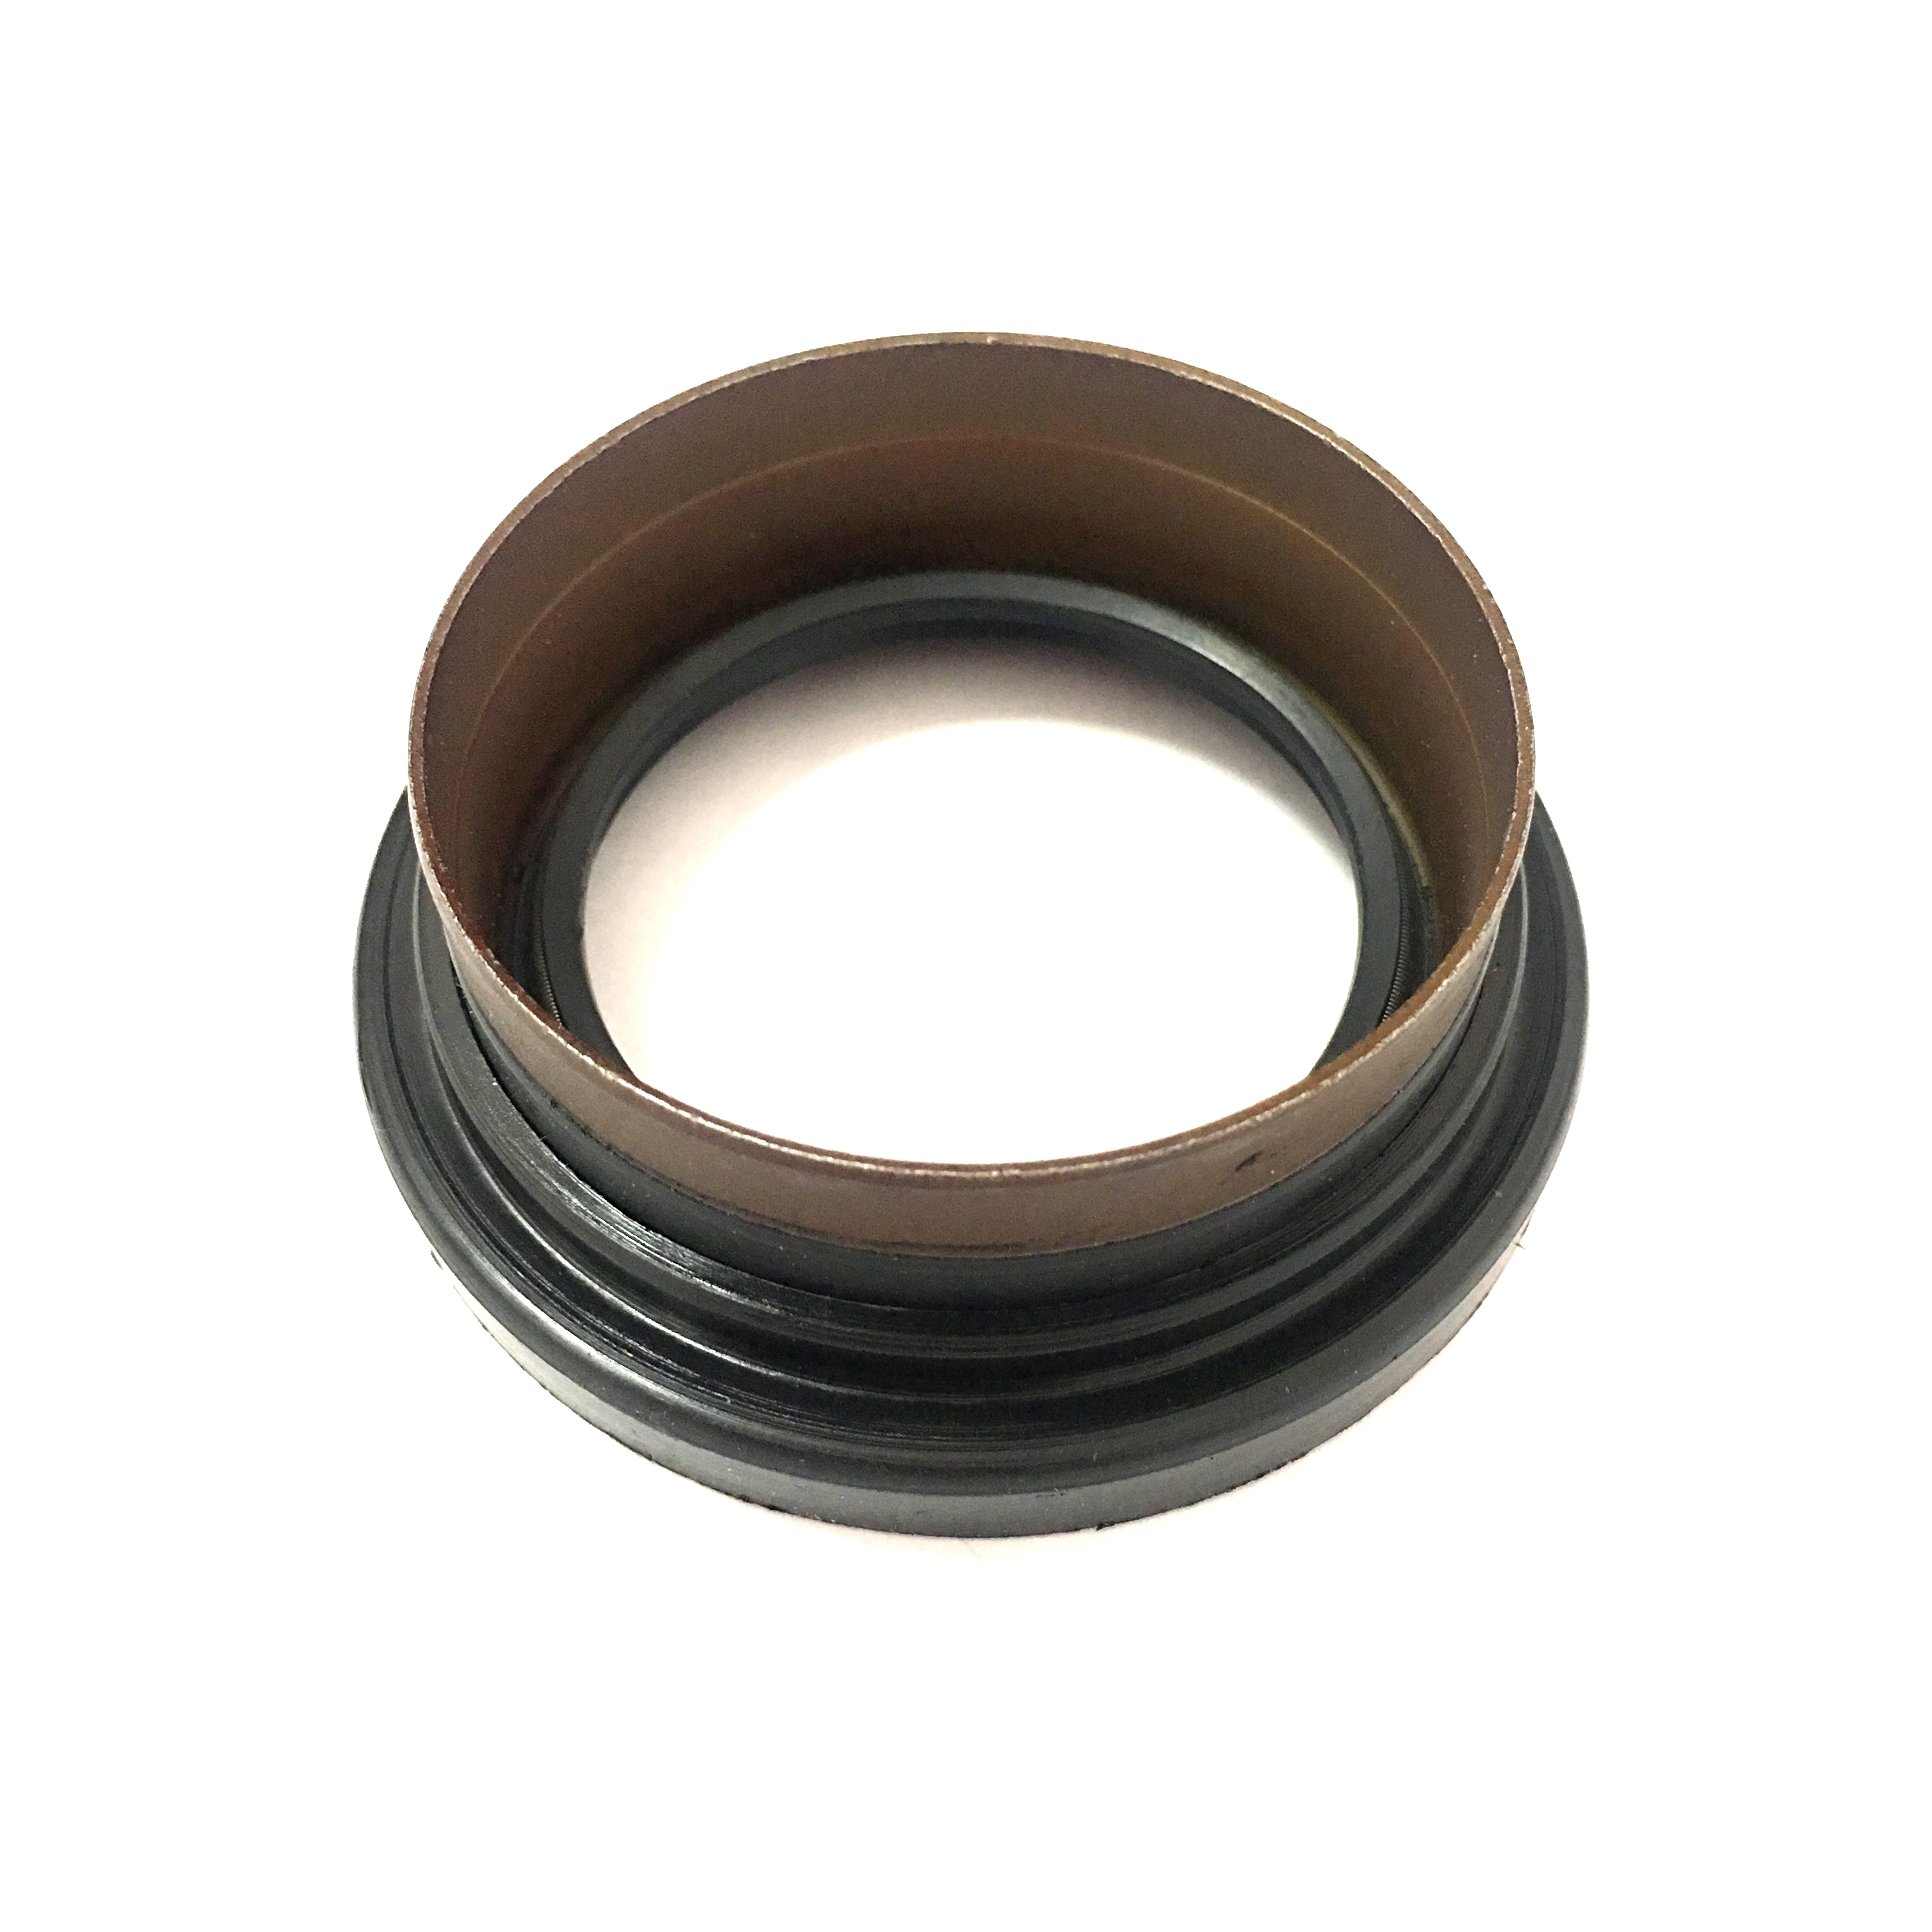 Seal For Differential Shaft VW Audi Oil Seal 48*60/74*12.6/26.6 OEM 02J409528A